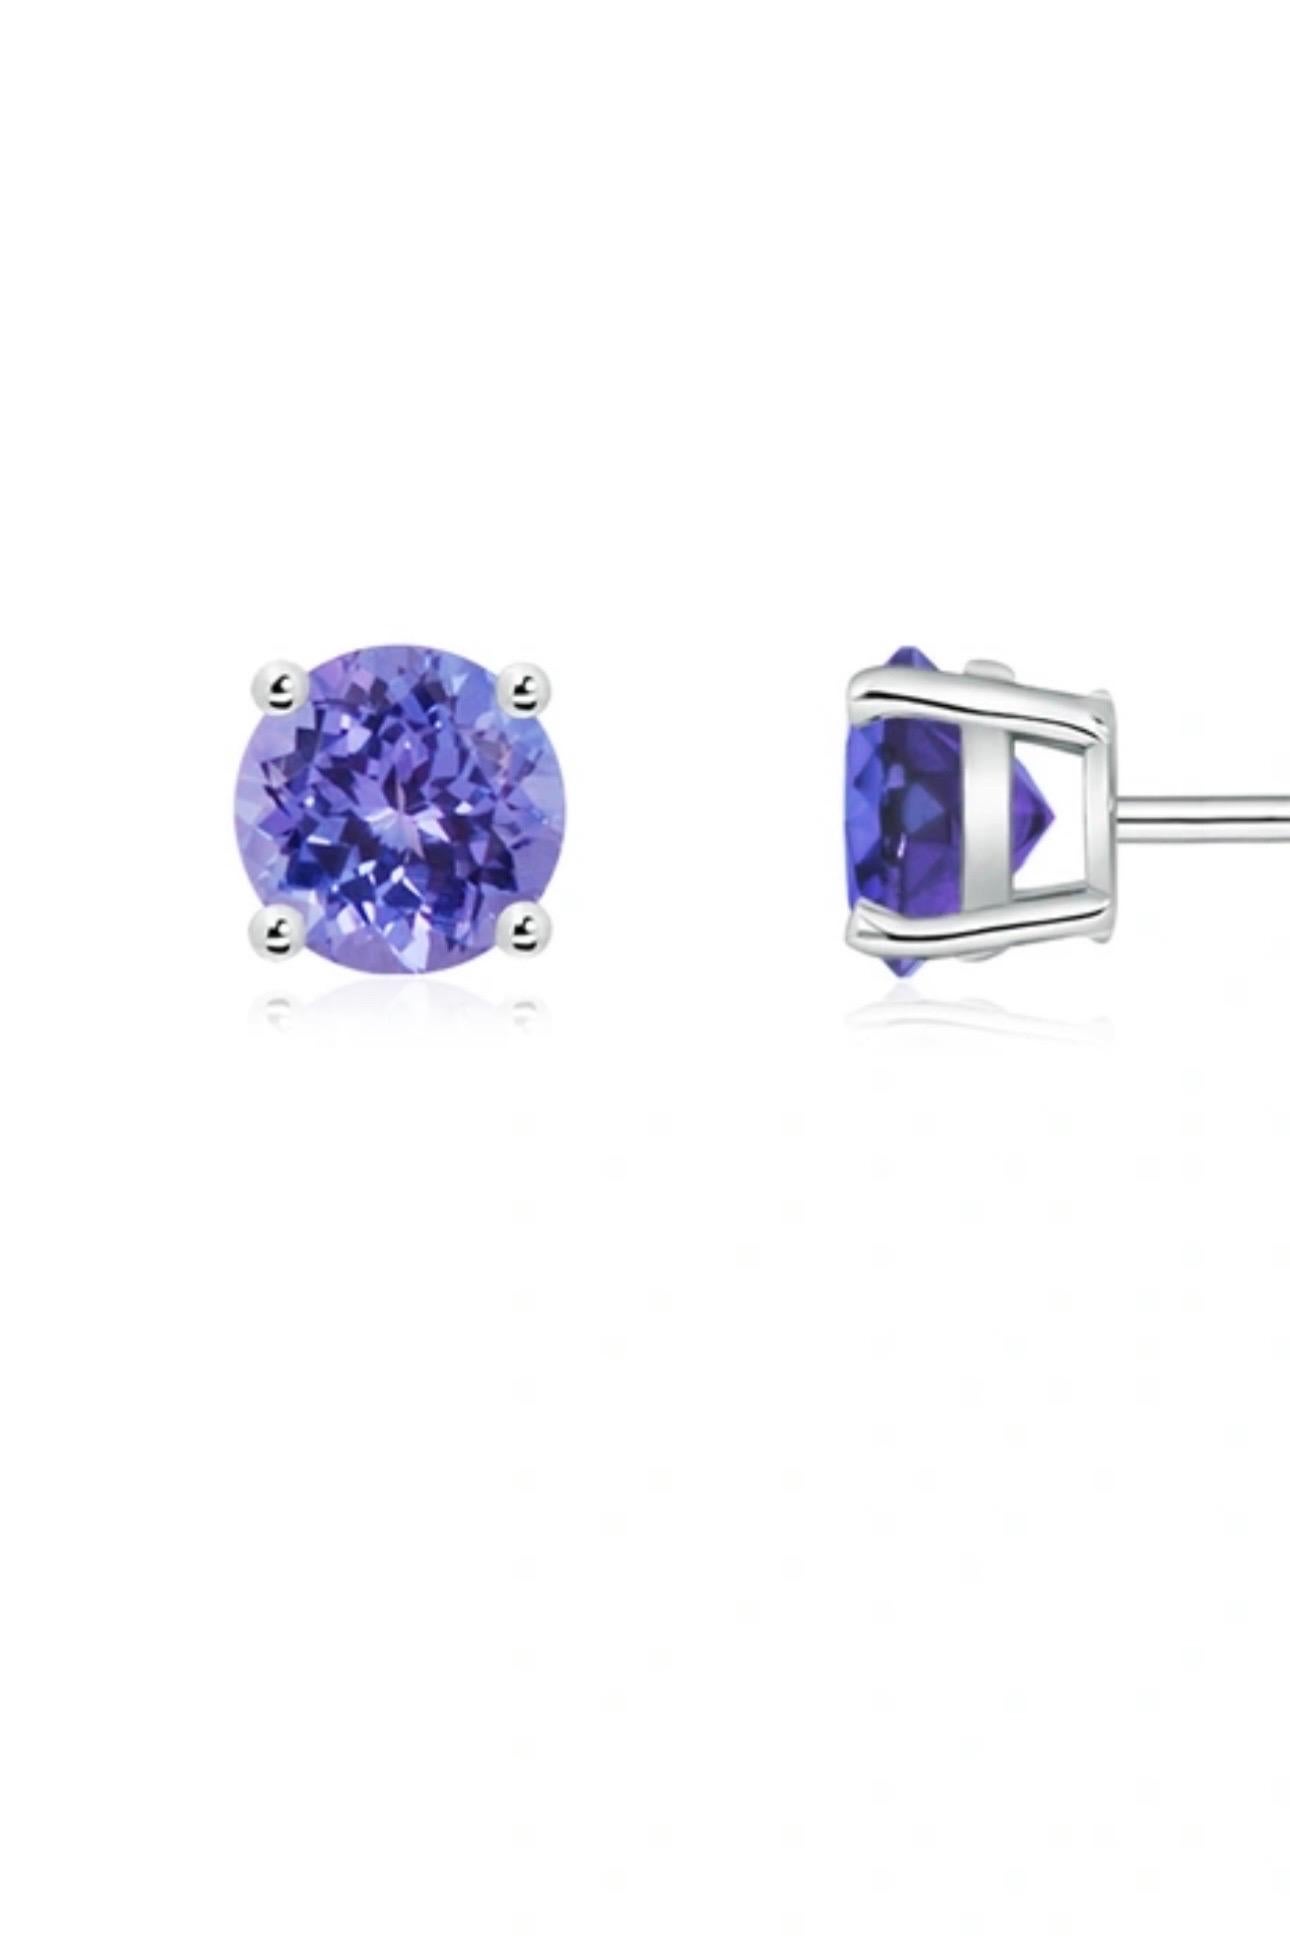 
2  Carat total  Round Cut Tanzanite.  perfect pair with  Post  Earrings  14 Karat  white Gold 
This exquisite pair of earrings are beautifully crafted with 14 karat White gold .
Weight of 14 K gold 1.5 grams
 Fine  Round Cut Tanzanite weighing